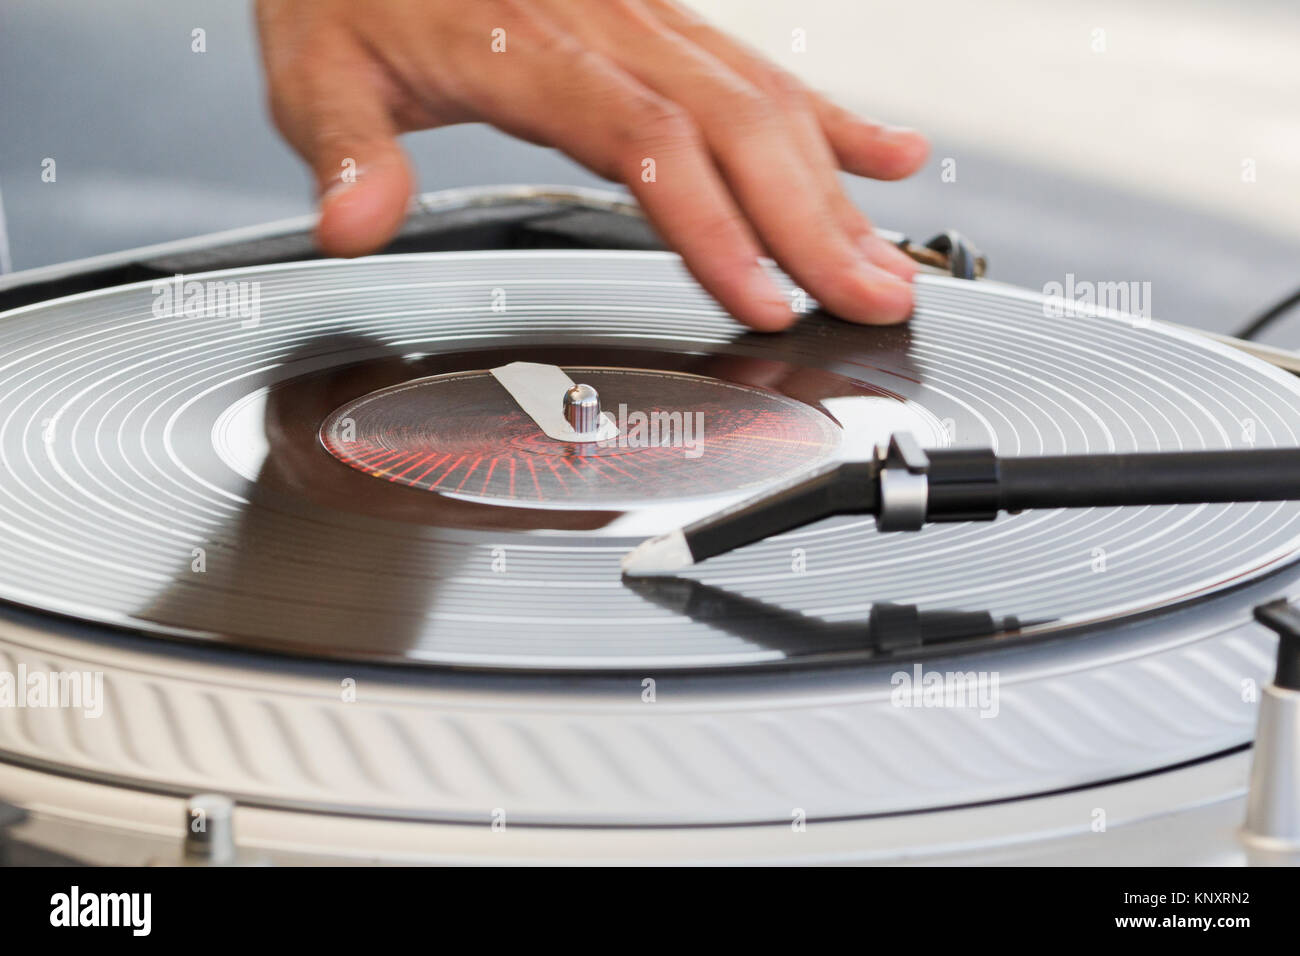 The dj uses vinyl records to mix electronic music and beat rap sound. Stock Photo